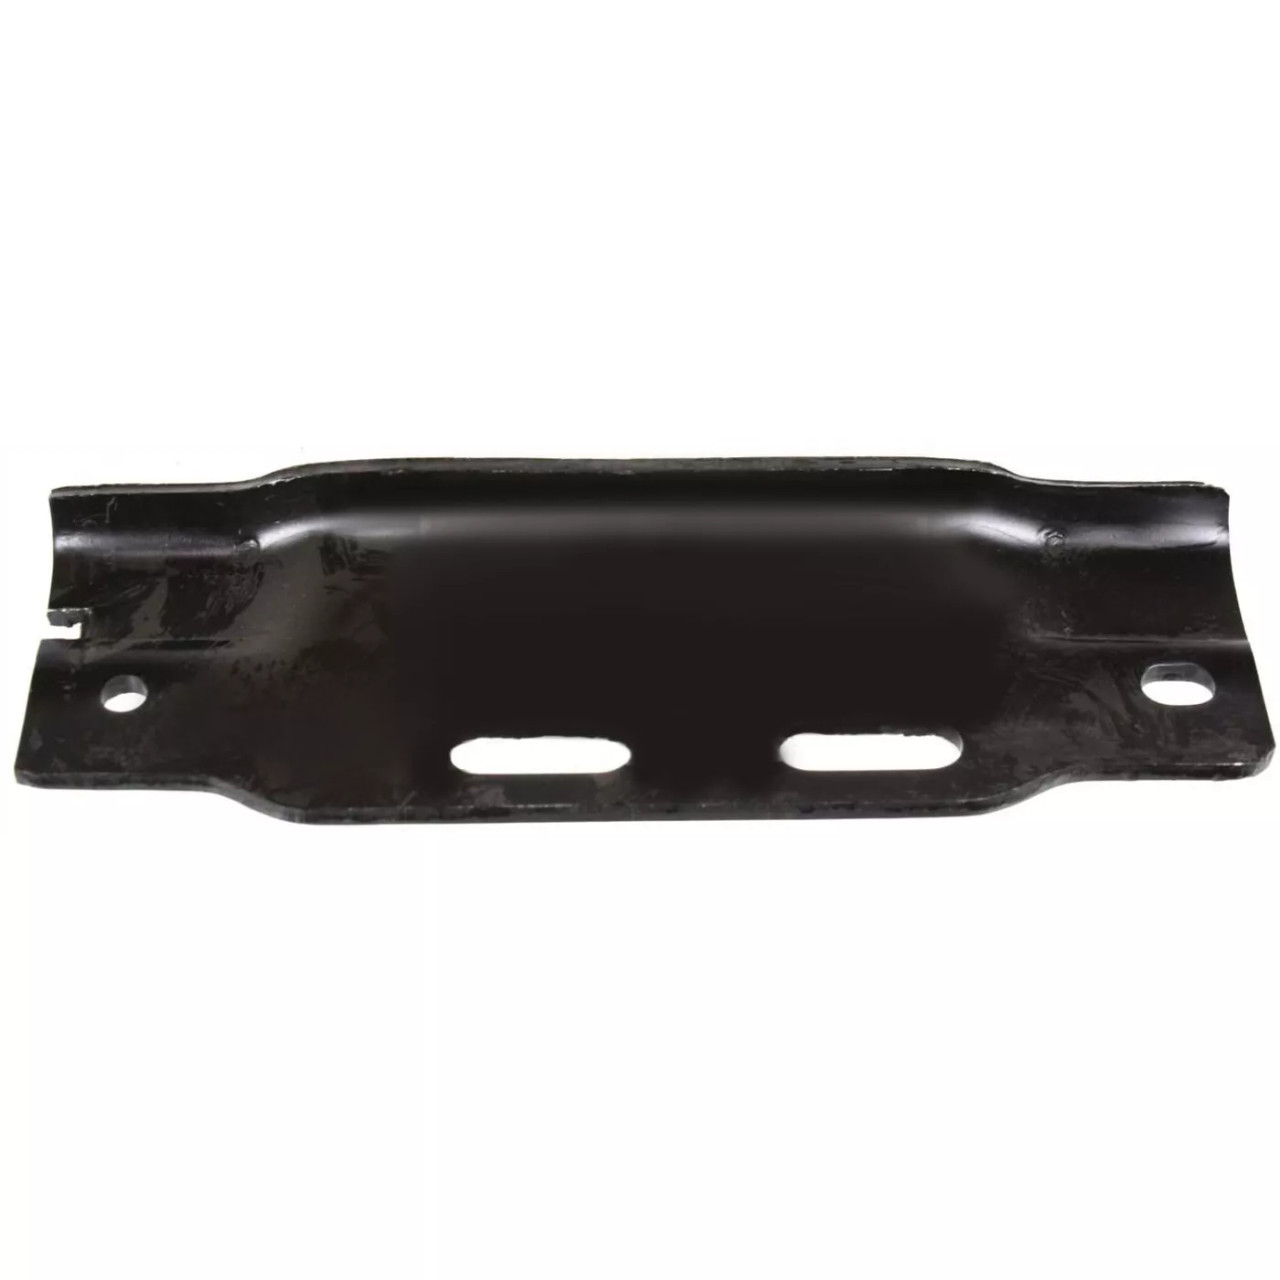 Bumper Bracket For 92-96 Ford F-150 92-97 F-250 F-350 Front Left and Right Side